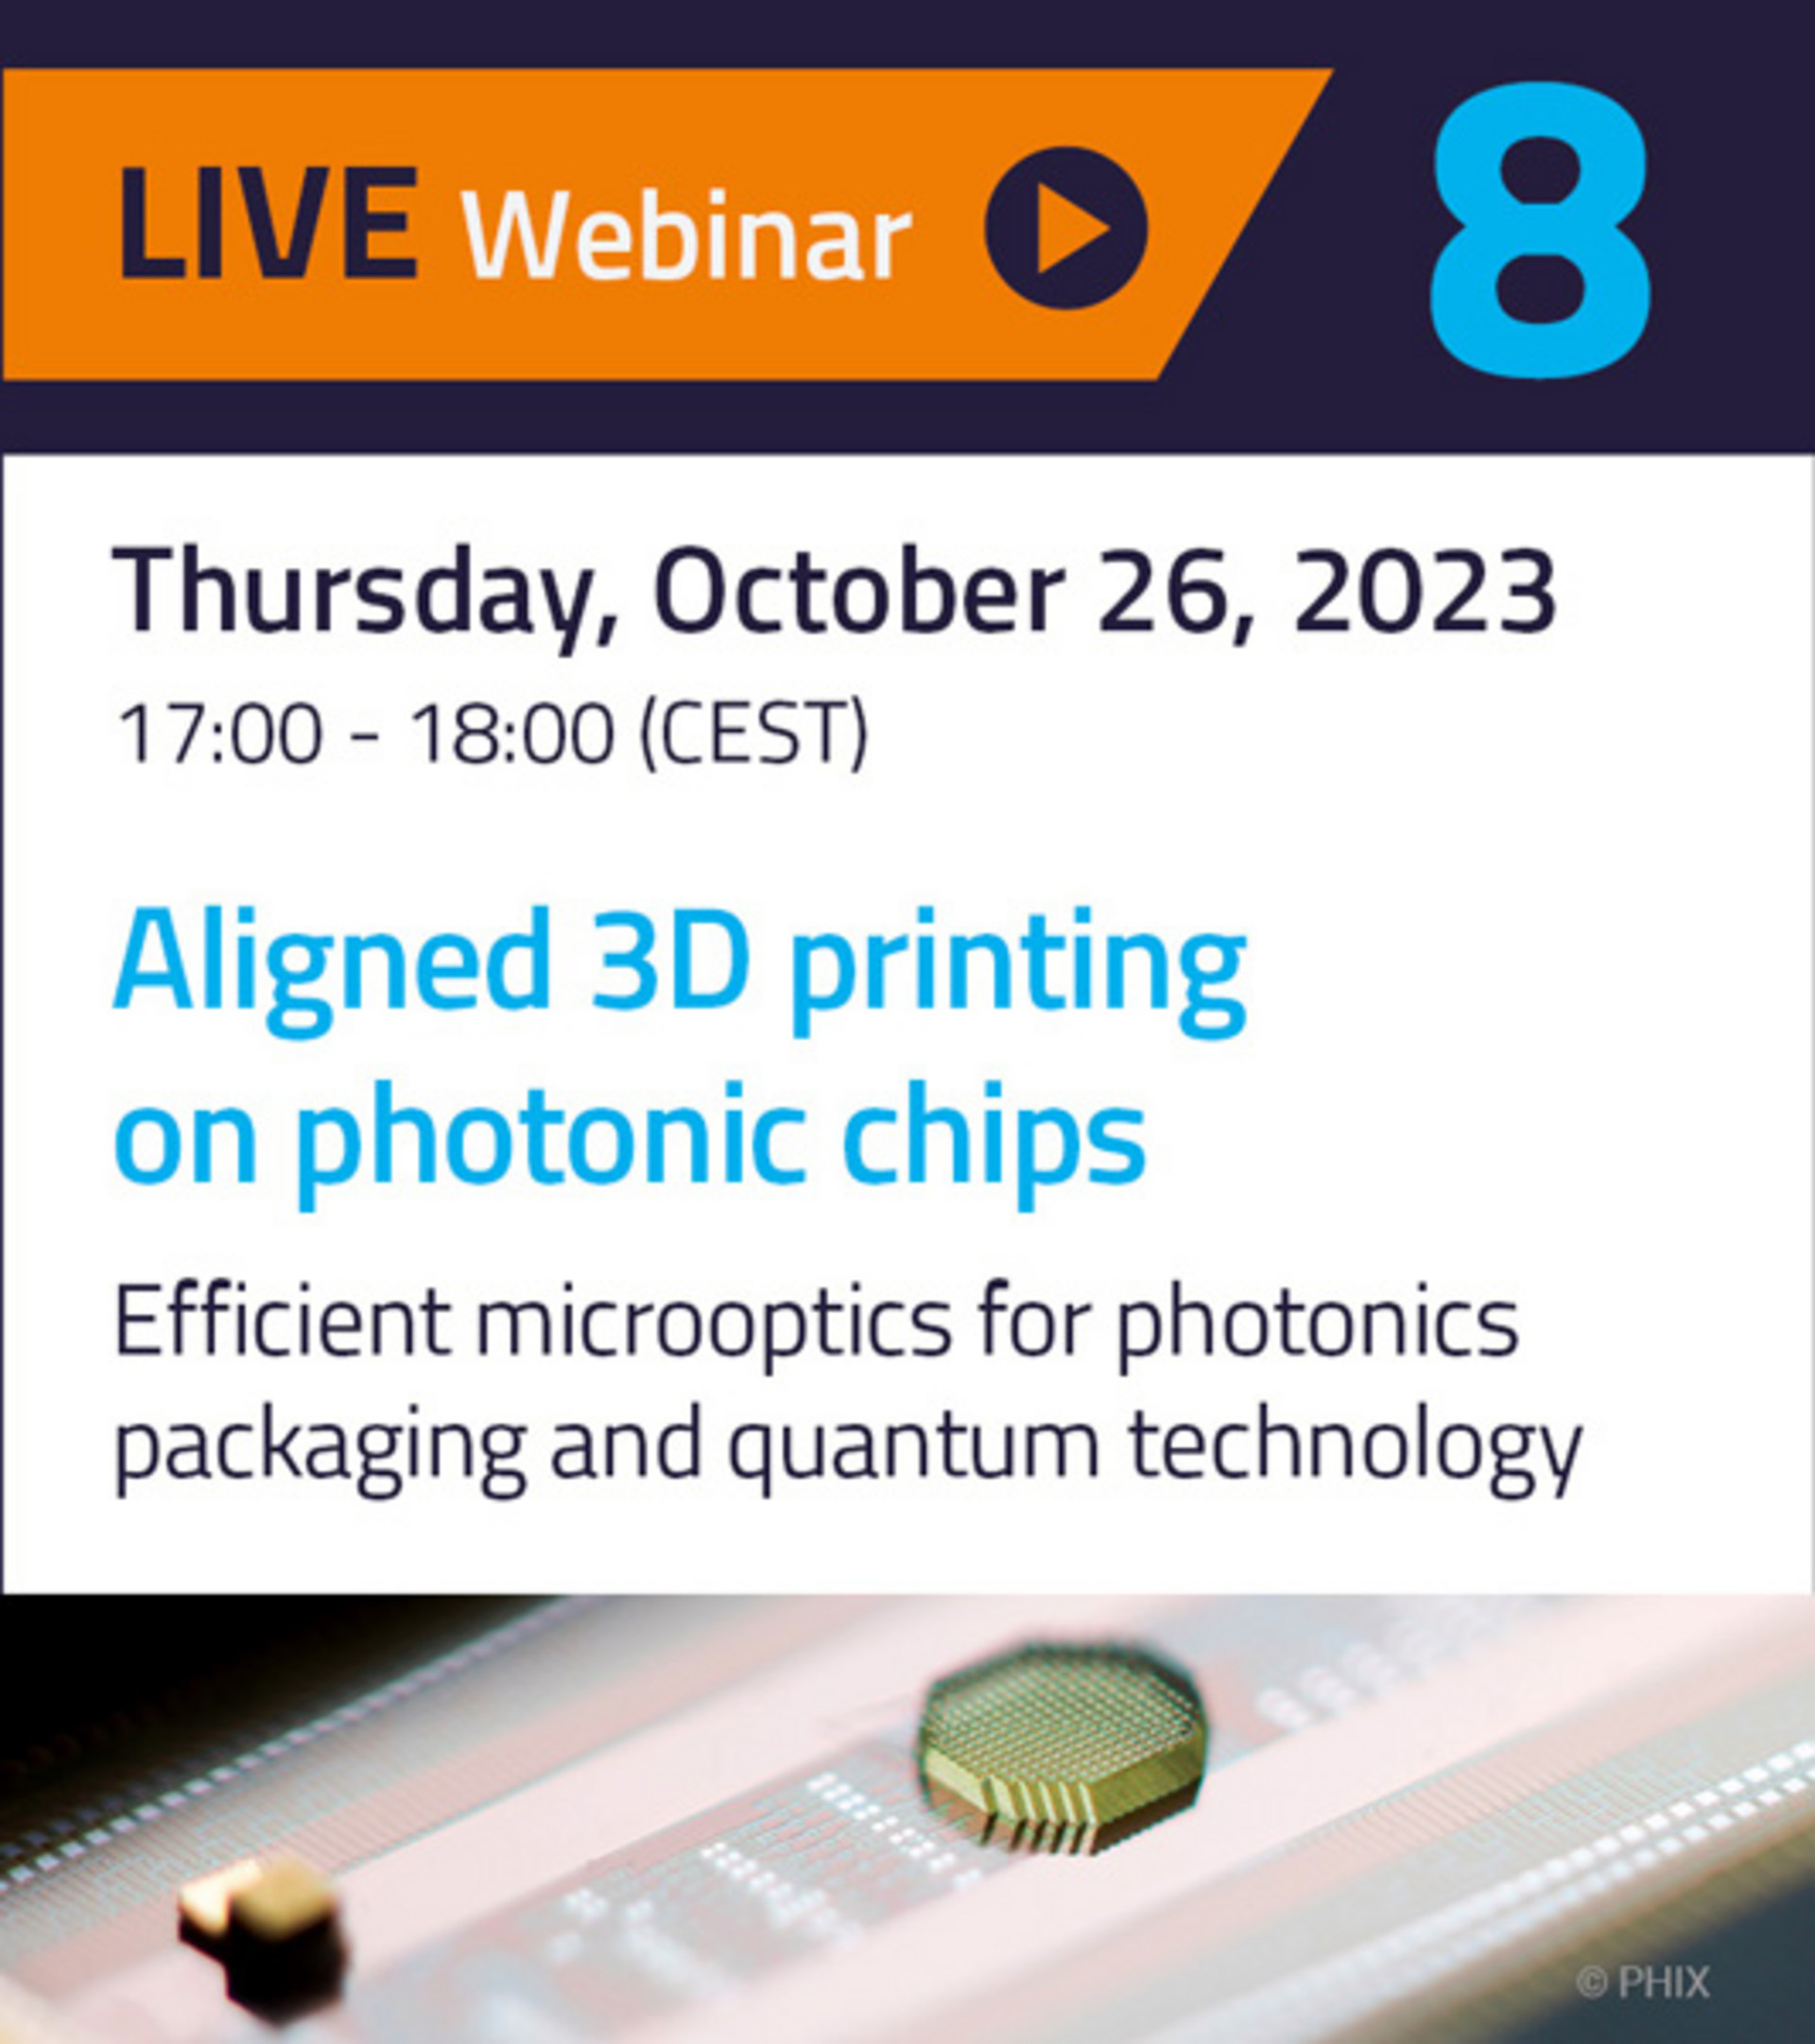 Webinar on Aligned 3D printing on photonic chips on October 26, 2023 with Prof. Wim Bogaerts, Dr. Wladick Hartmann and Mareike Trappen